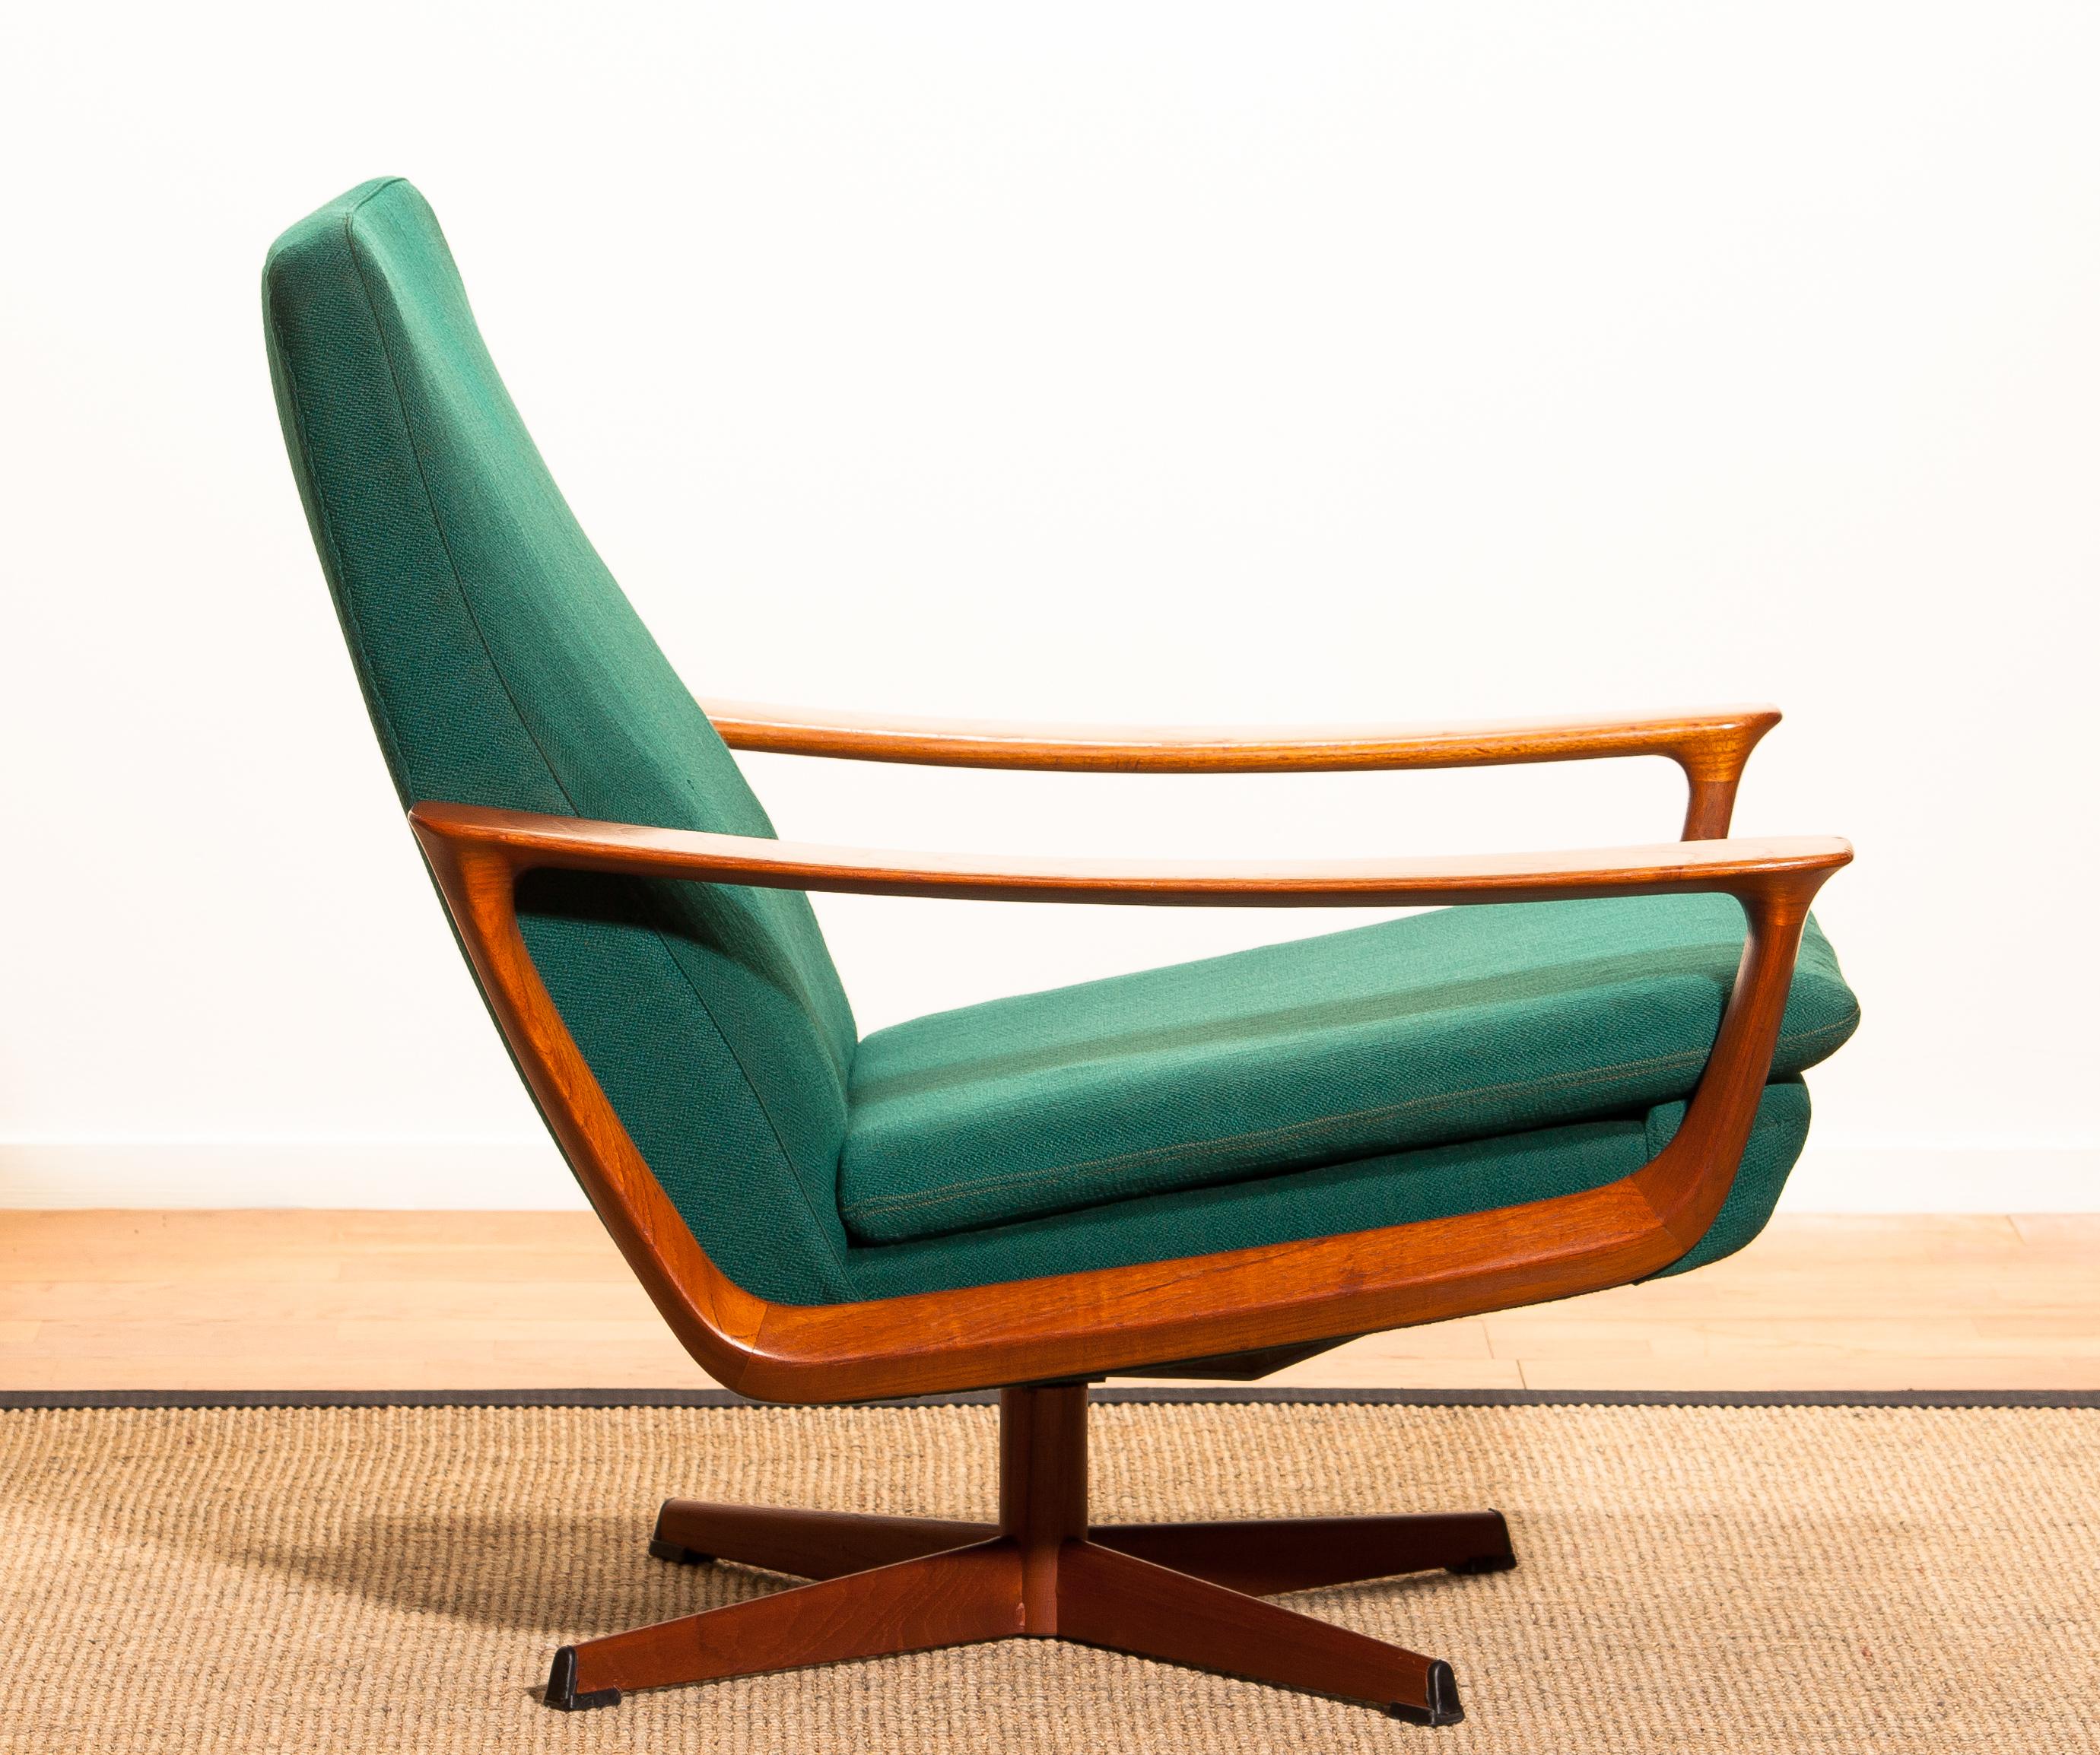 Extremely rare teak swivel chair by Johannes Andersen for Trensums, Denmark. 
The chair to the right is in excellent condition. Upholstery and padding shows wear consistent with age and use.
The chair to the left is also in perfect condition